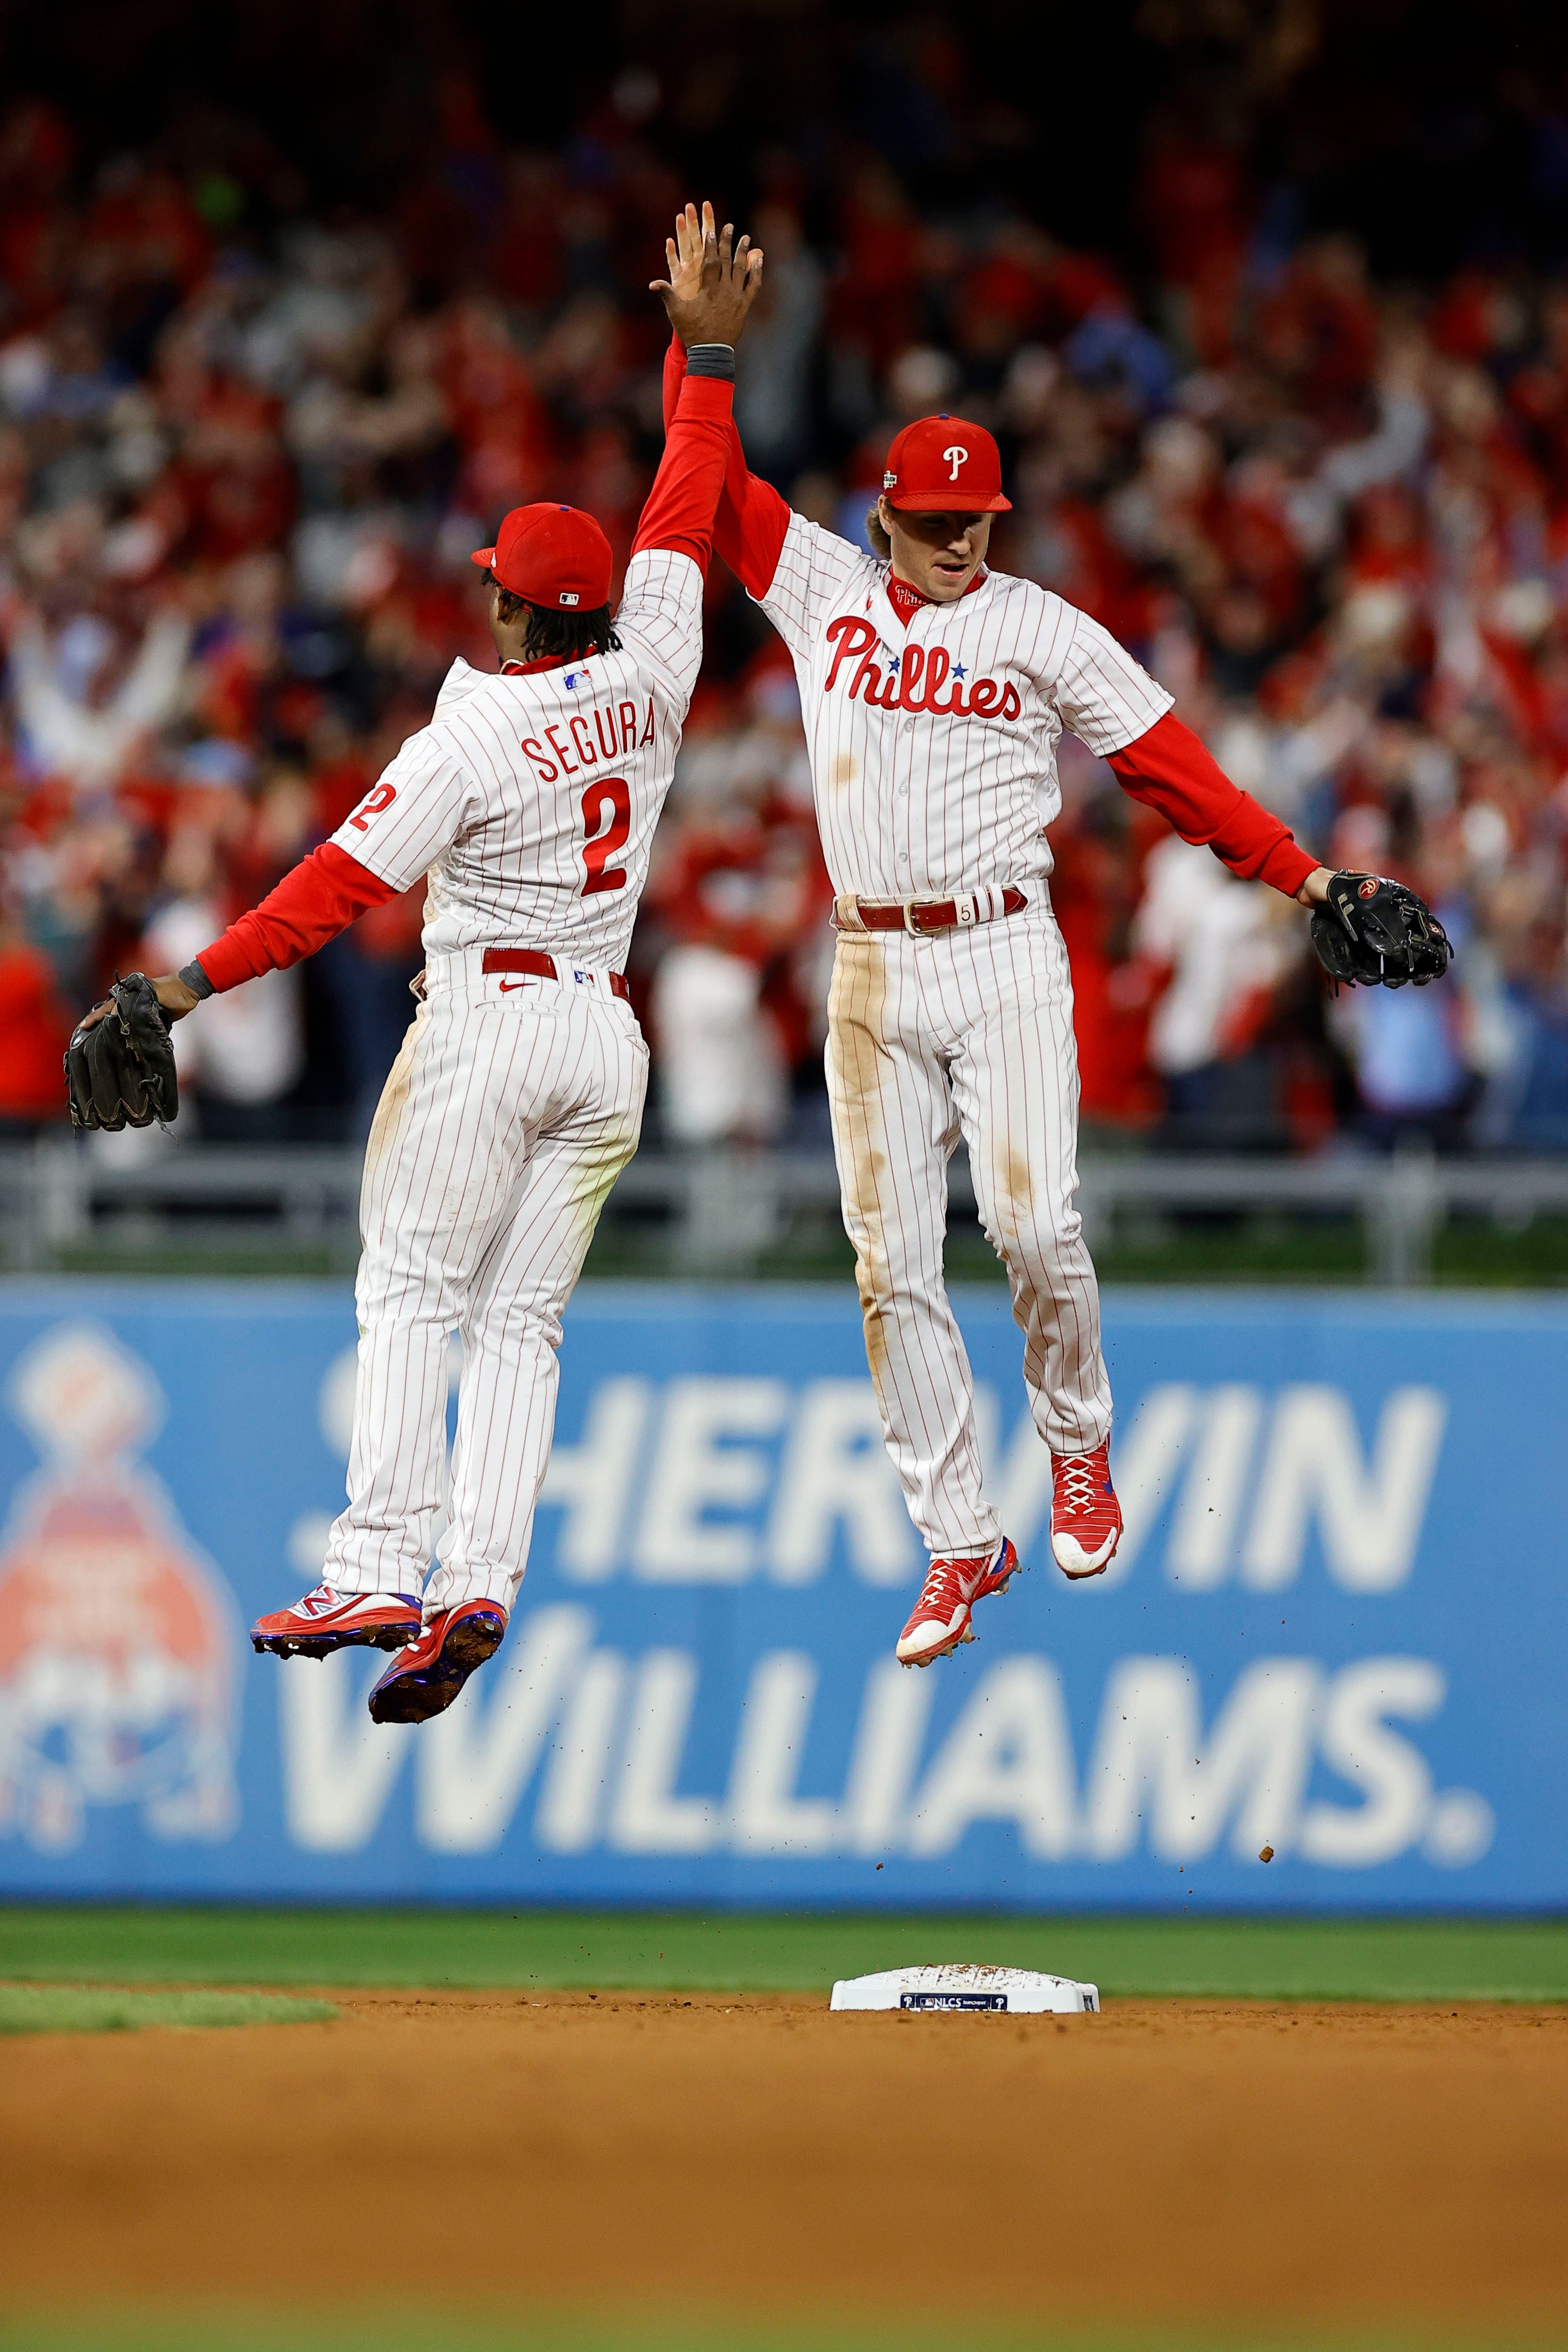 Jean Segura's wild ride in Game 3 ends with huge play, Phillies in control  of NLCS